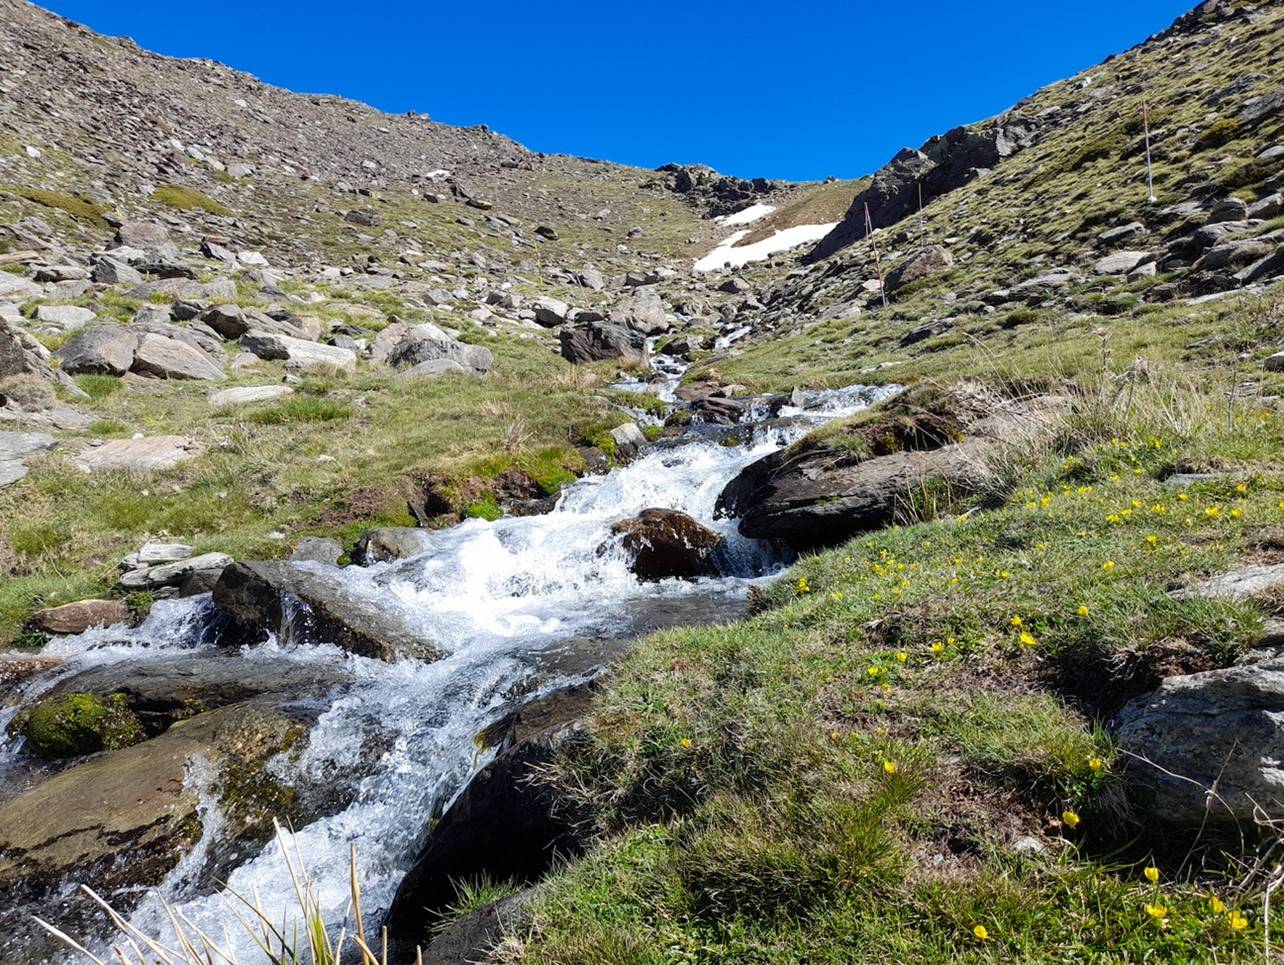 Spain's Sierra Nevada with a water stream rushing down a mountainside.